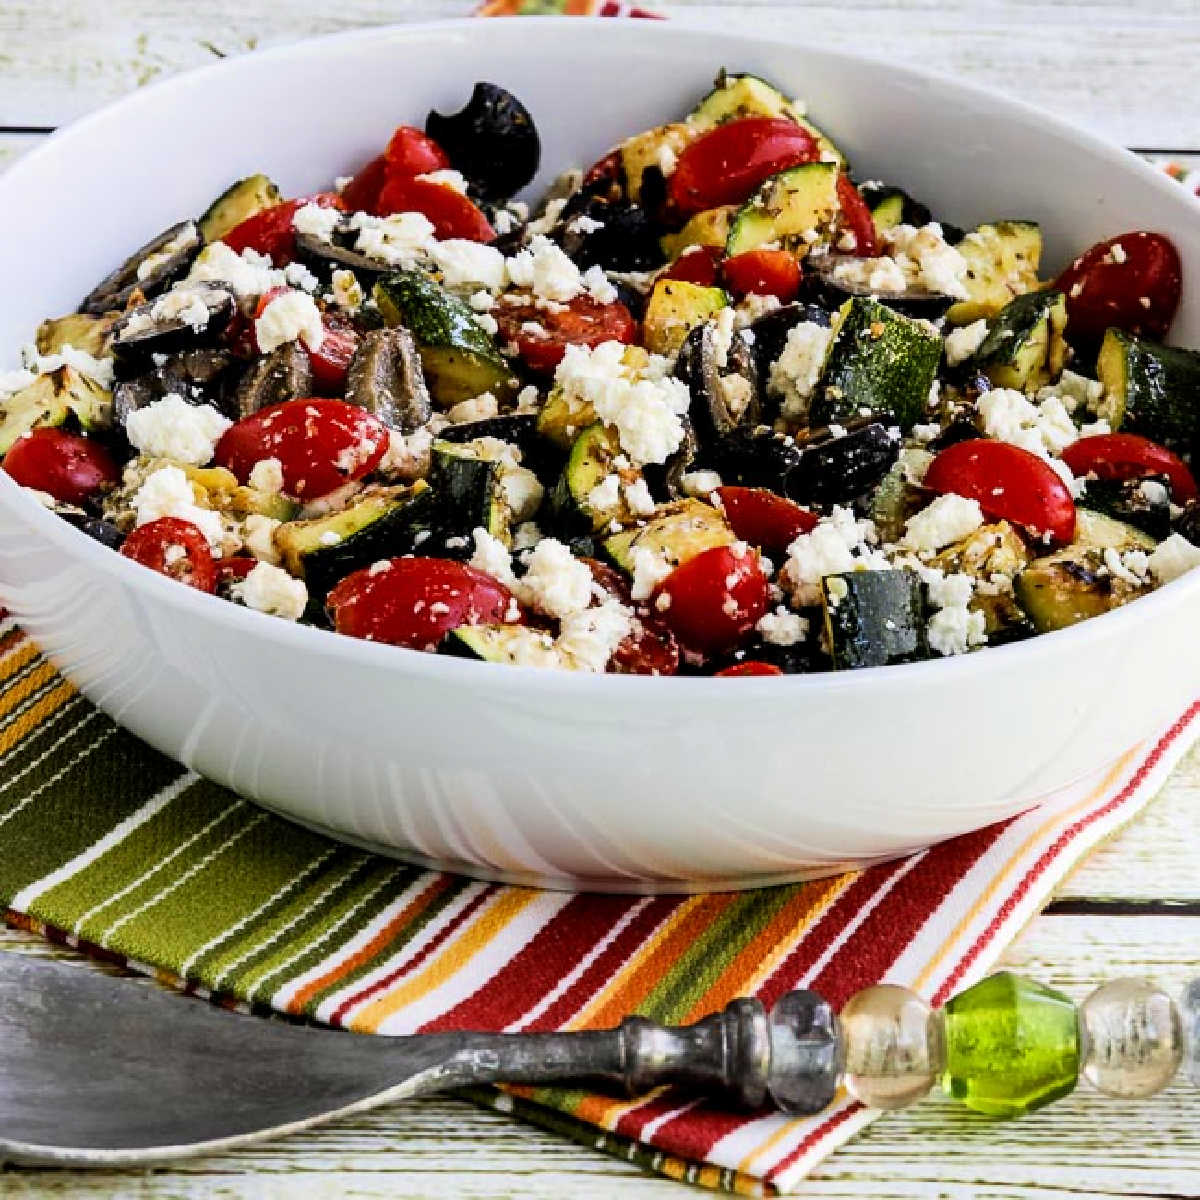 Square image of Grilled Zucchini Greek Salad shown in serving bowl on striped napkin.